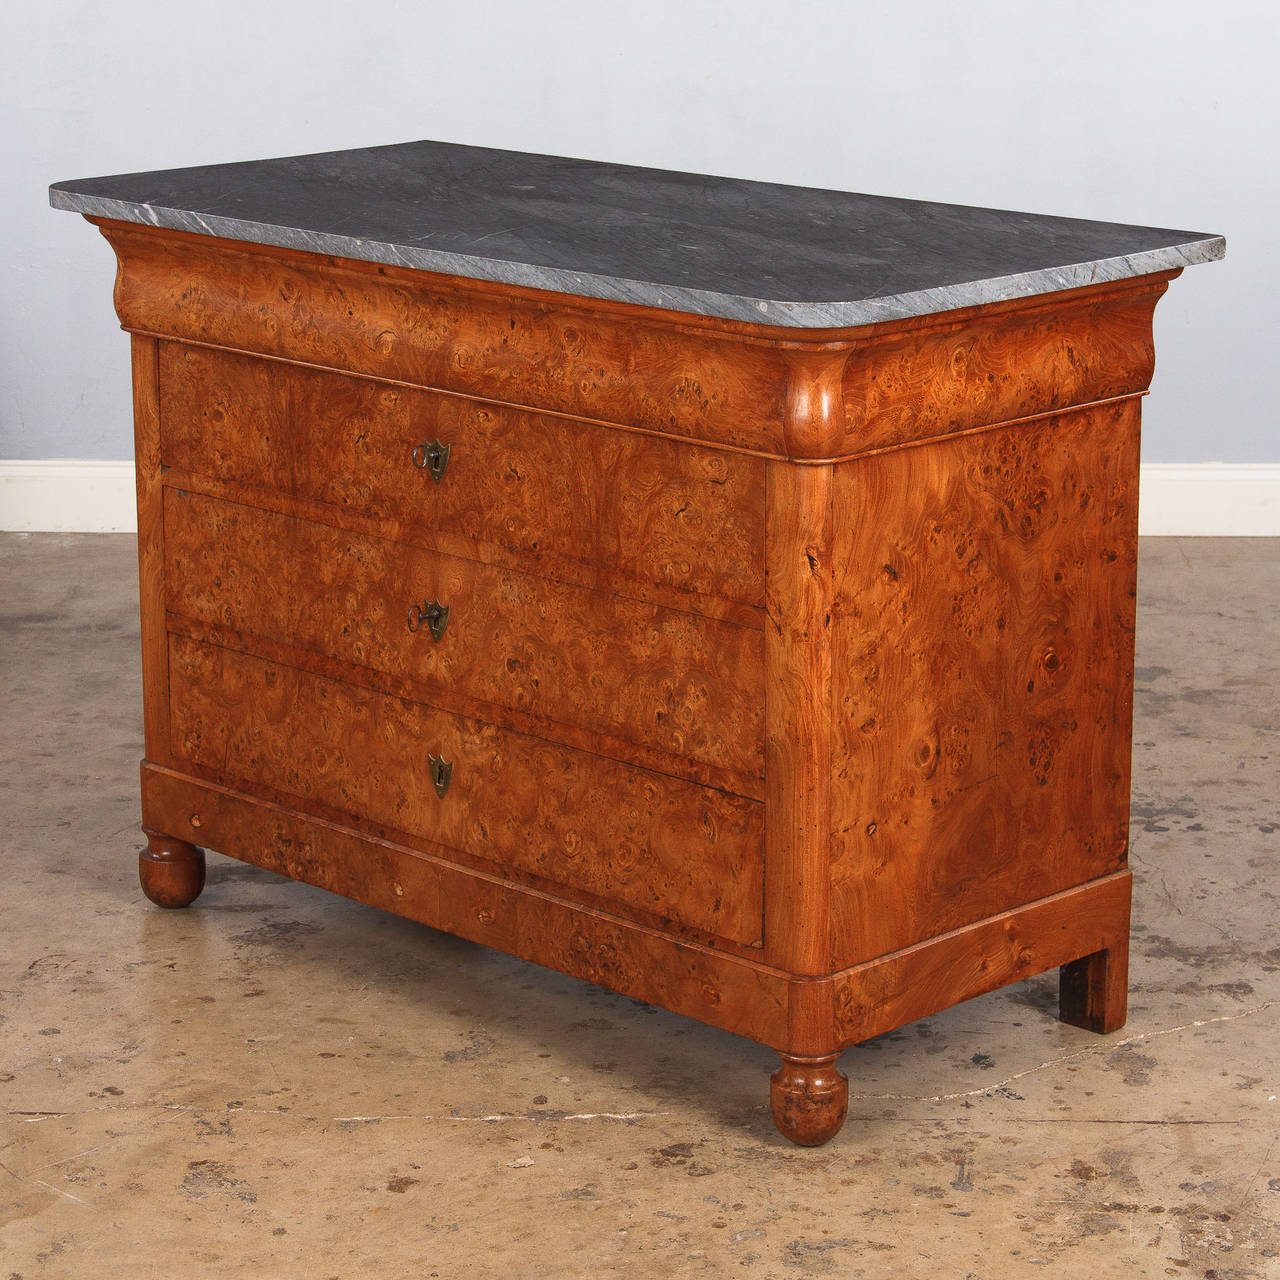 19th Century French Restauration Chest of Drawers with Marble Top, Early 1800s